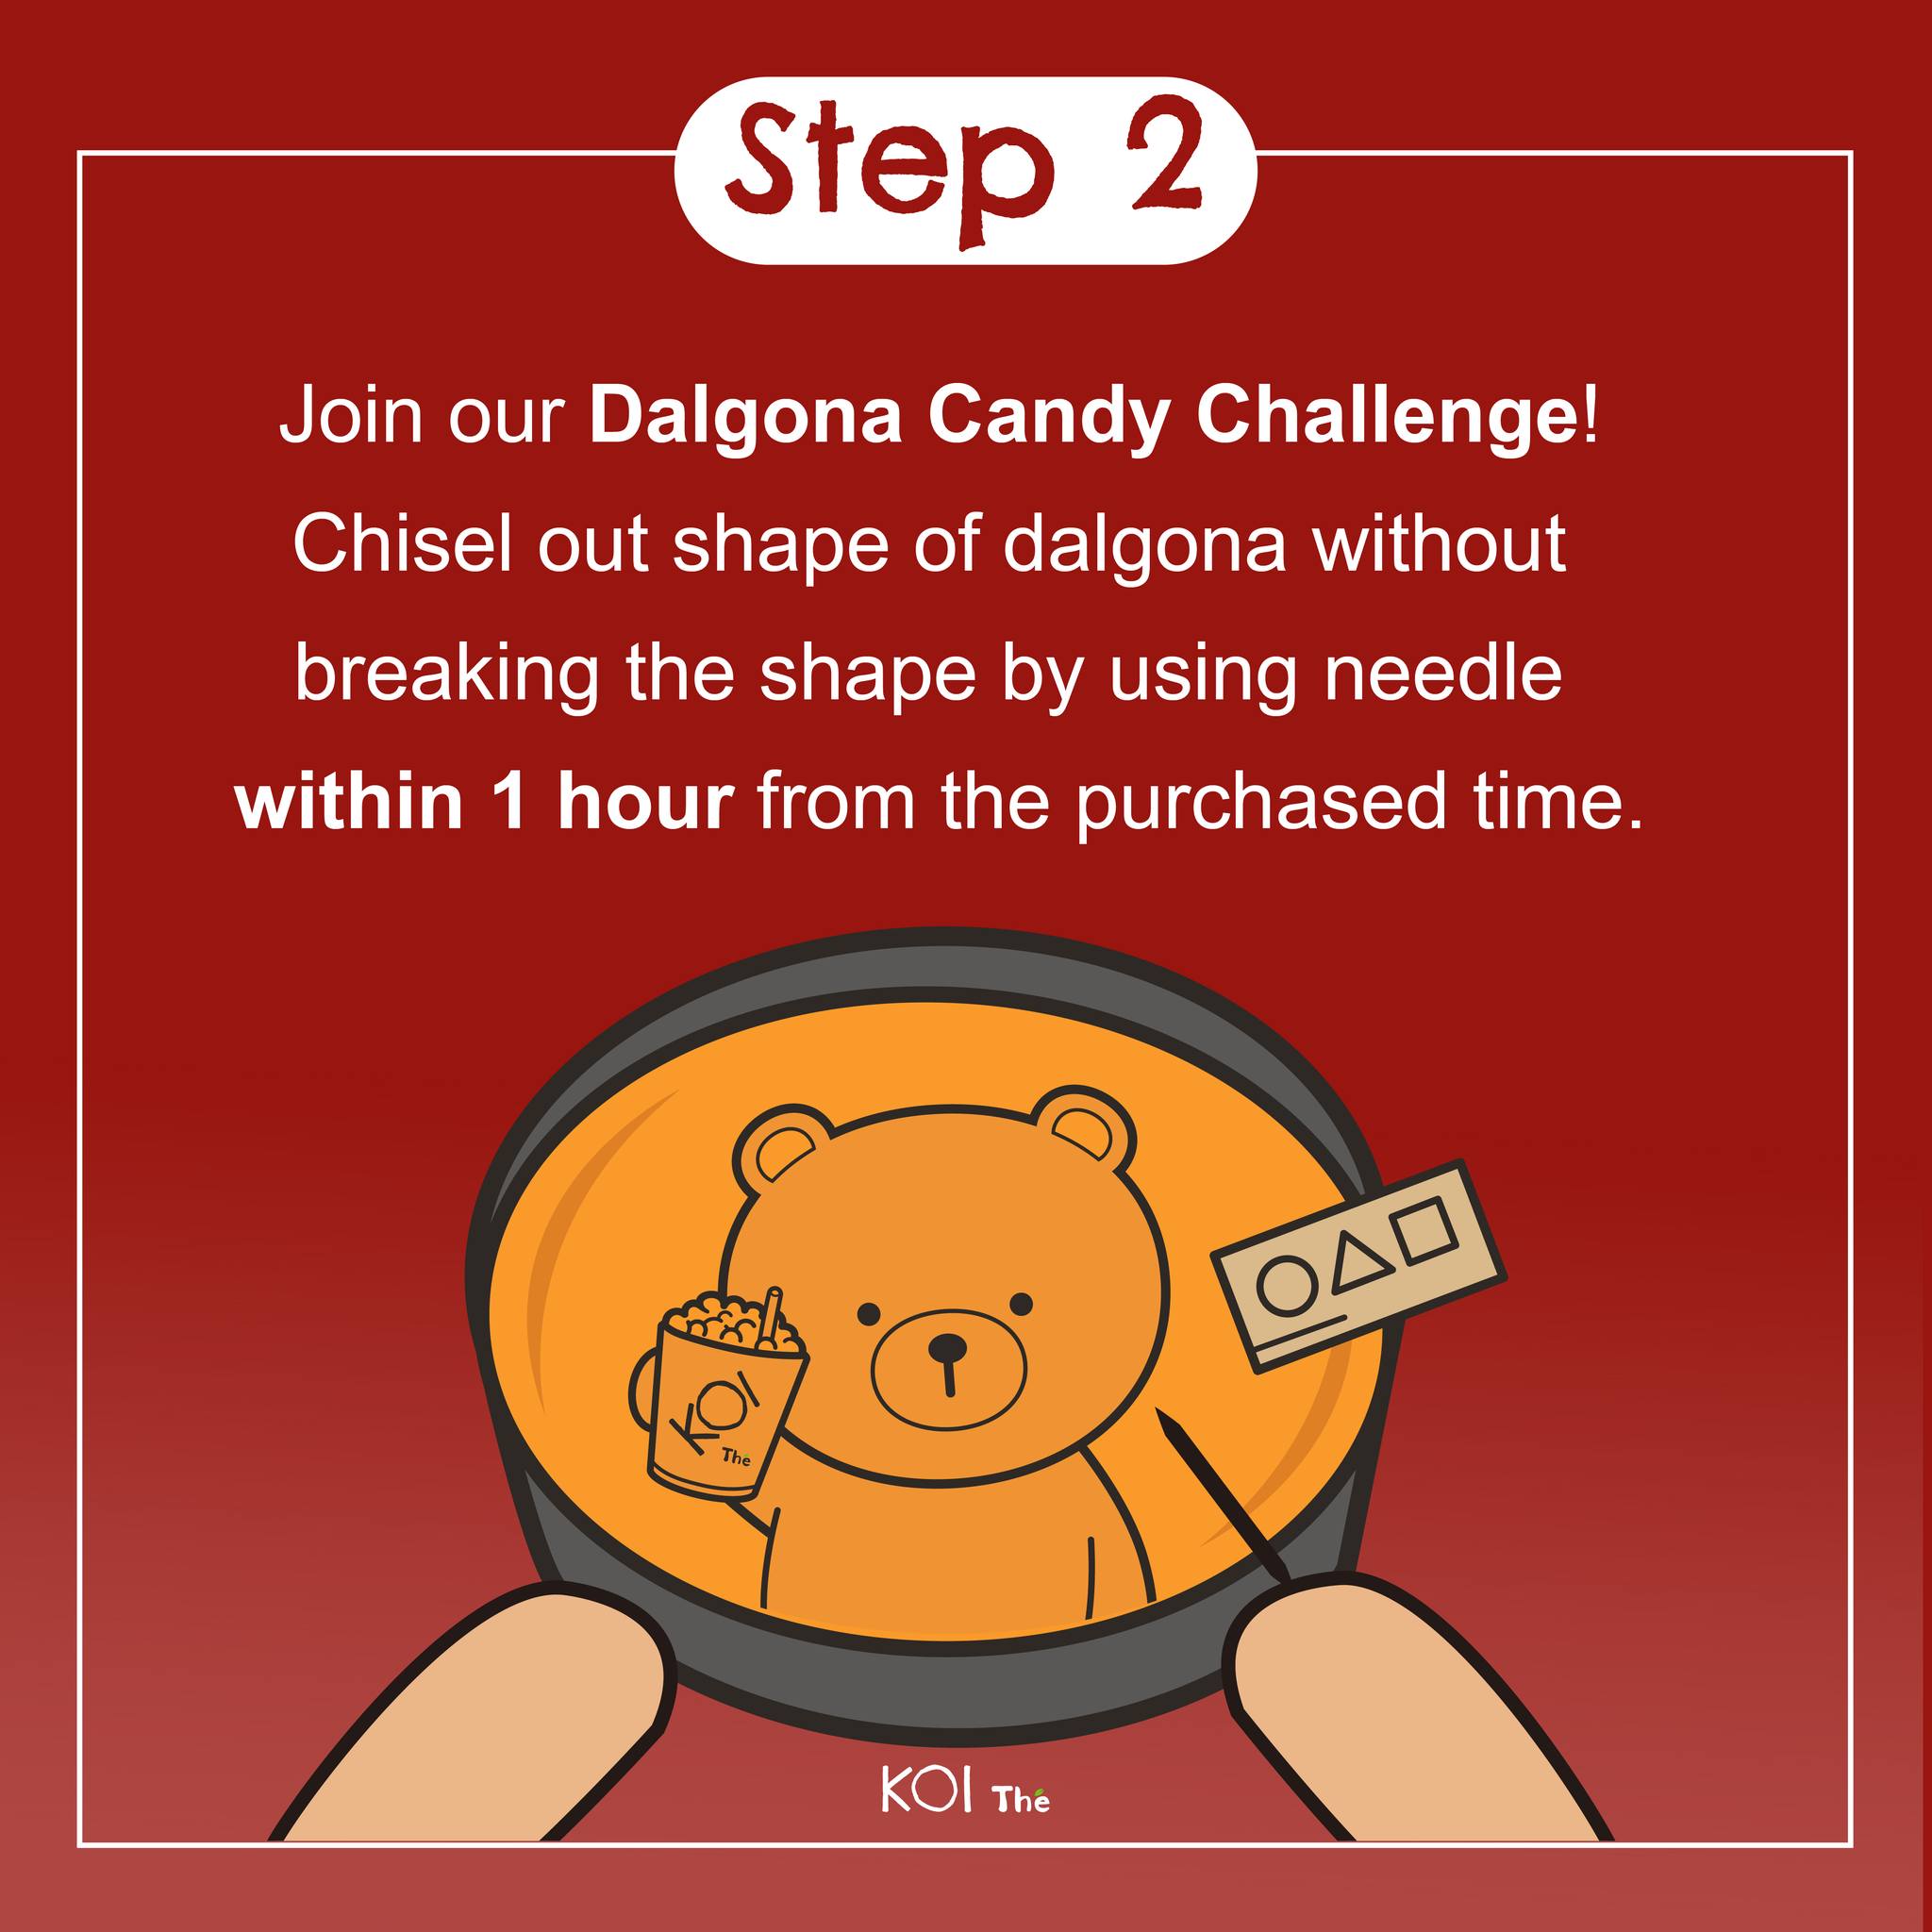 Free Dalgona Candy and Join the Challenge